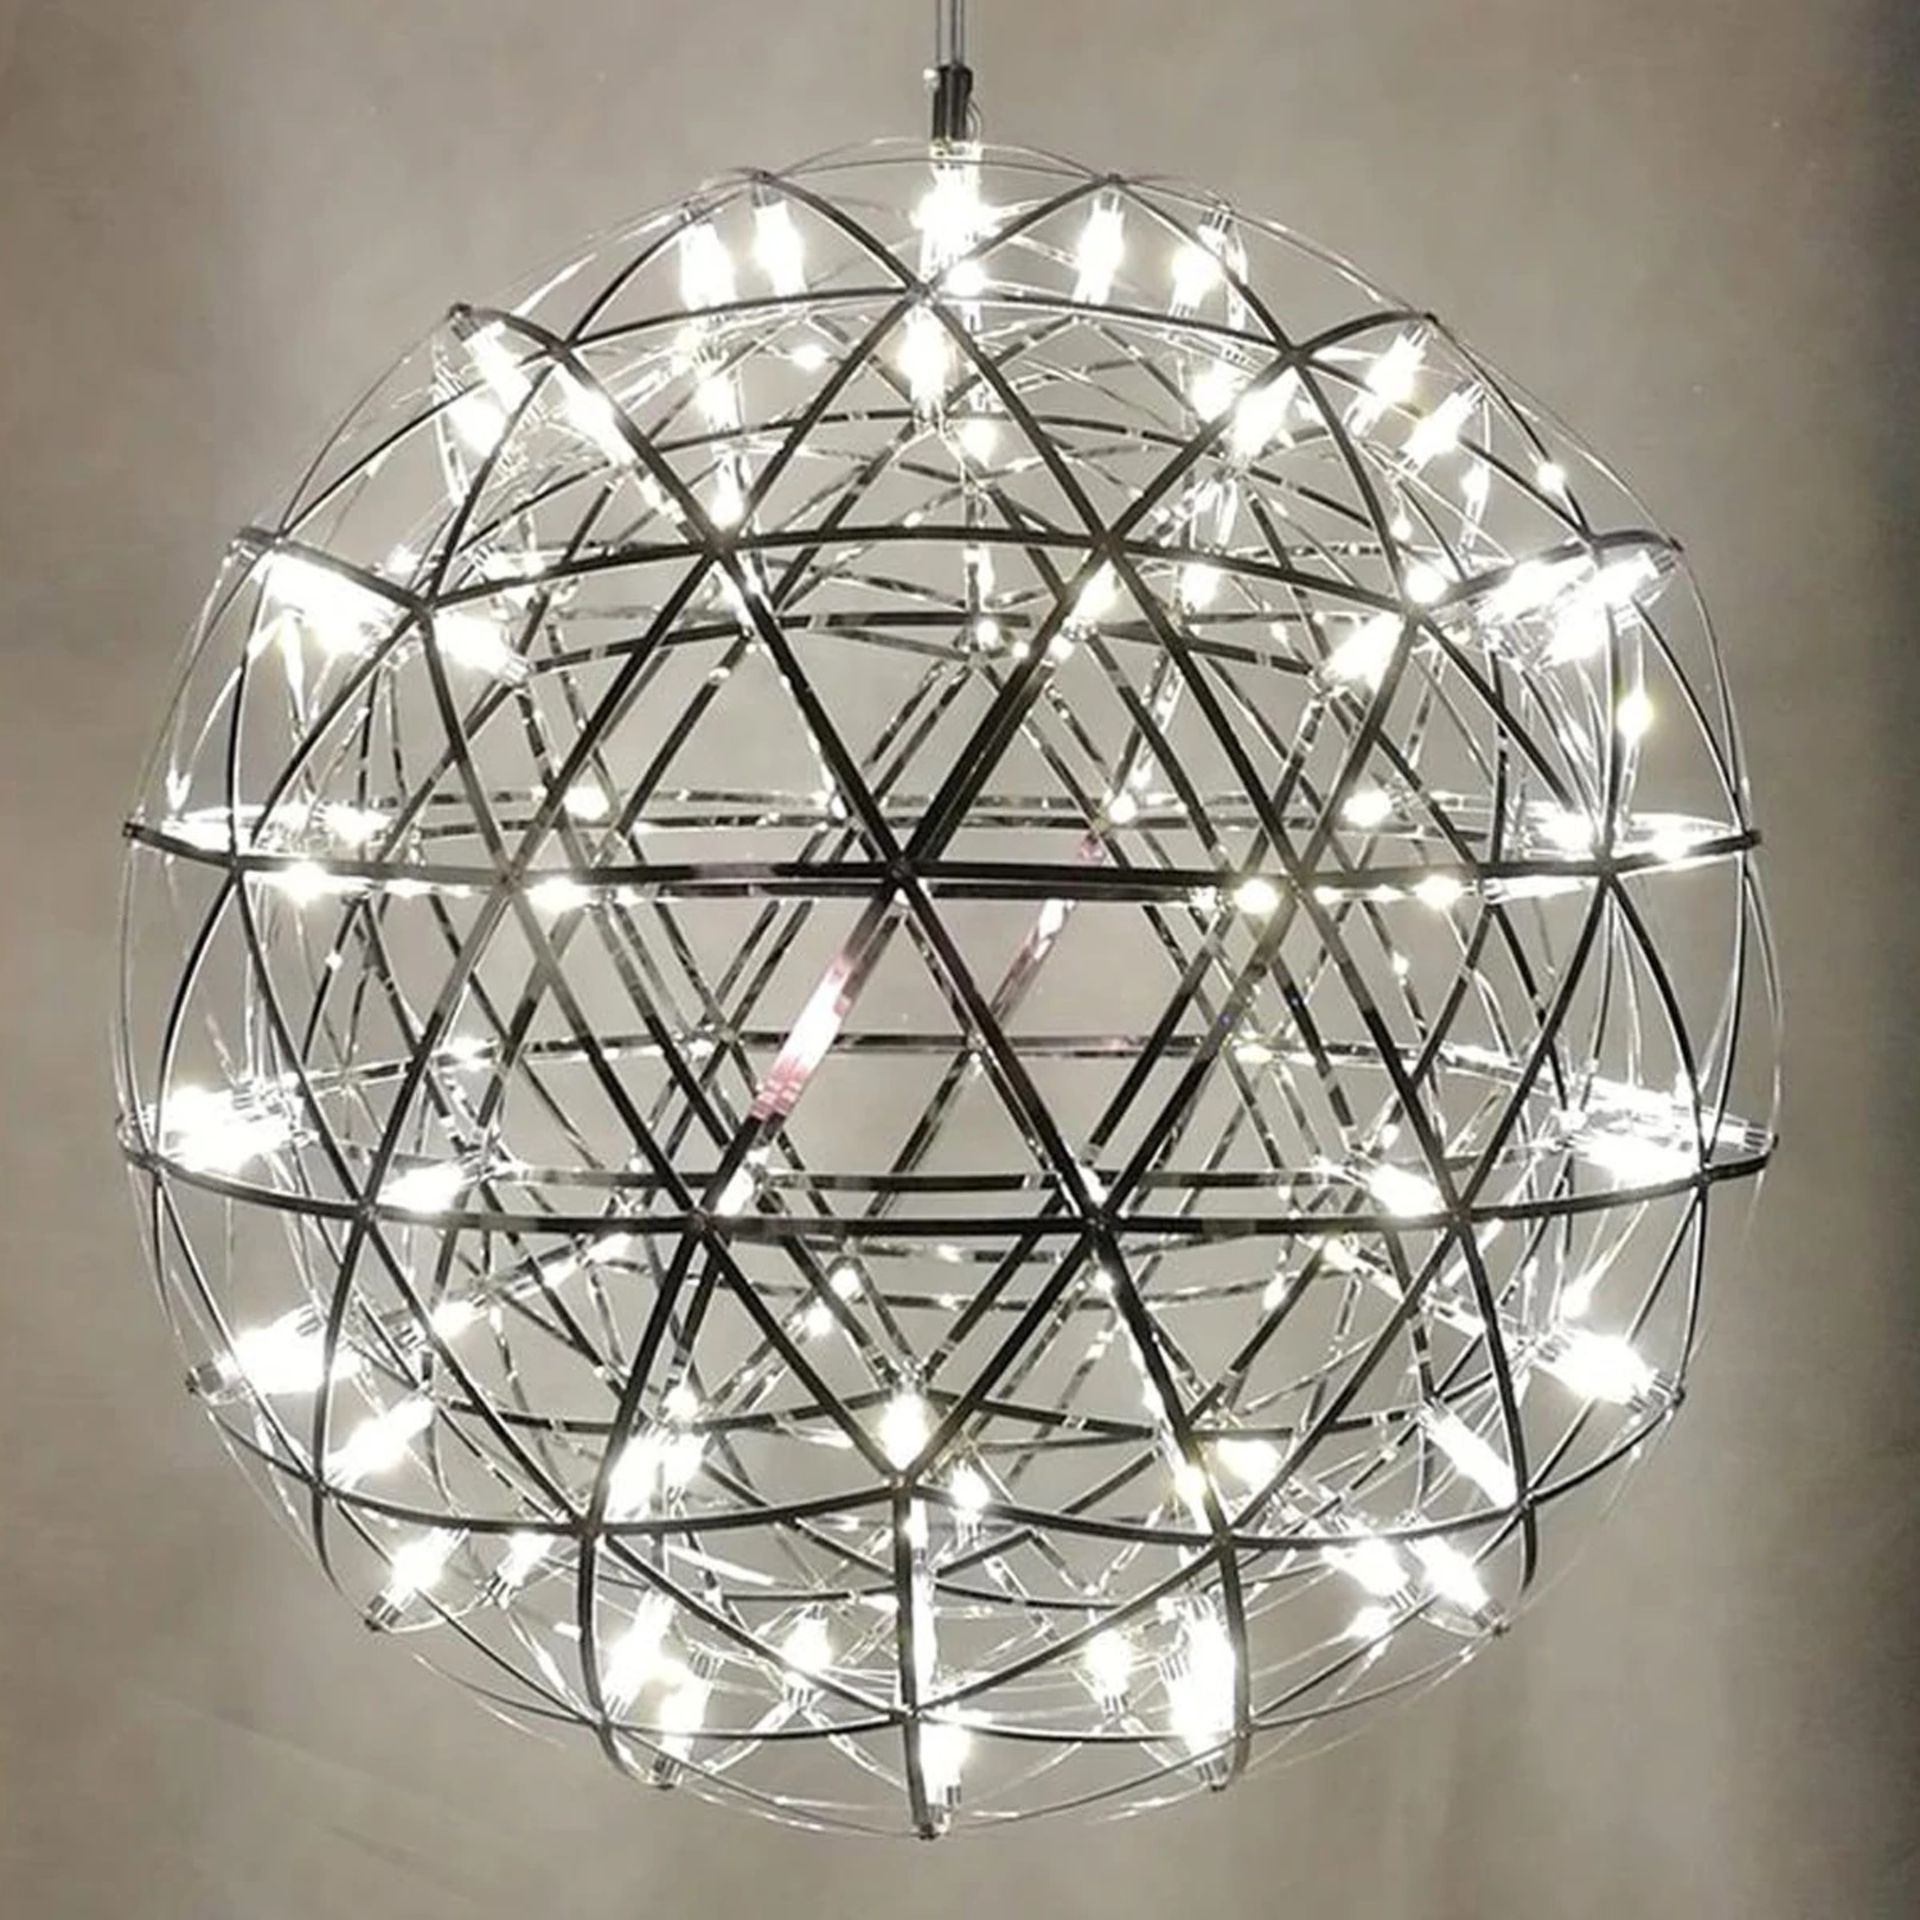 Starburst Large Hanging Pendant 90cm diameter x 162 lights with its chrome bodied spherical globe - Image 2 of 3